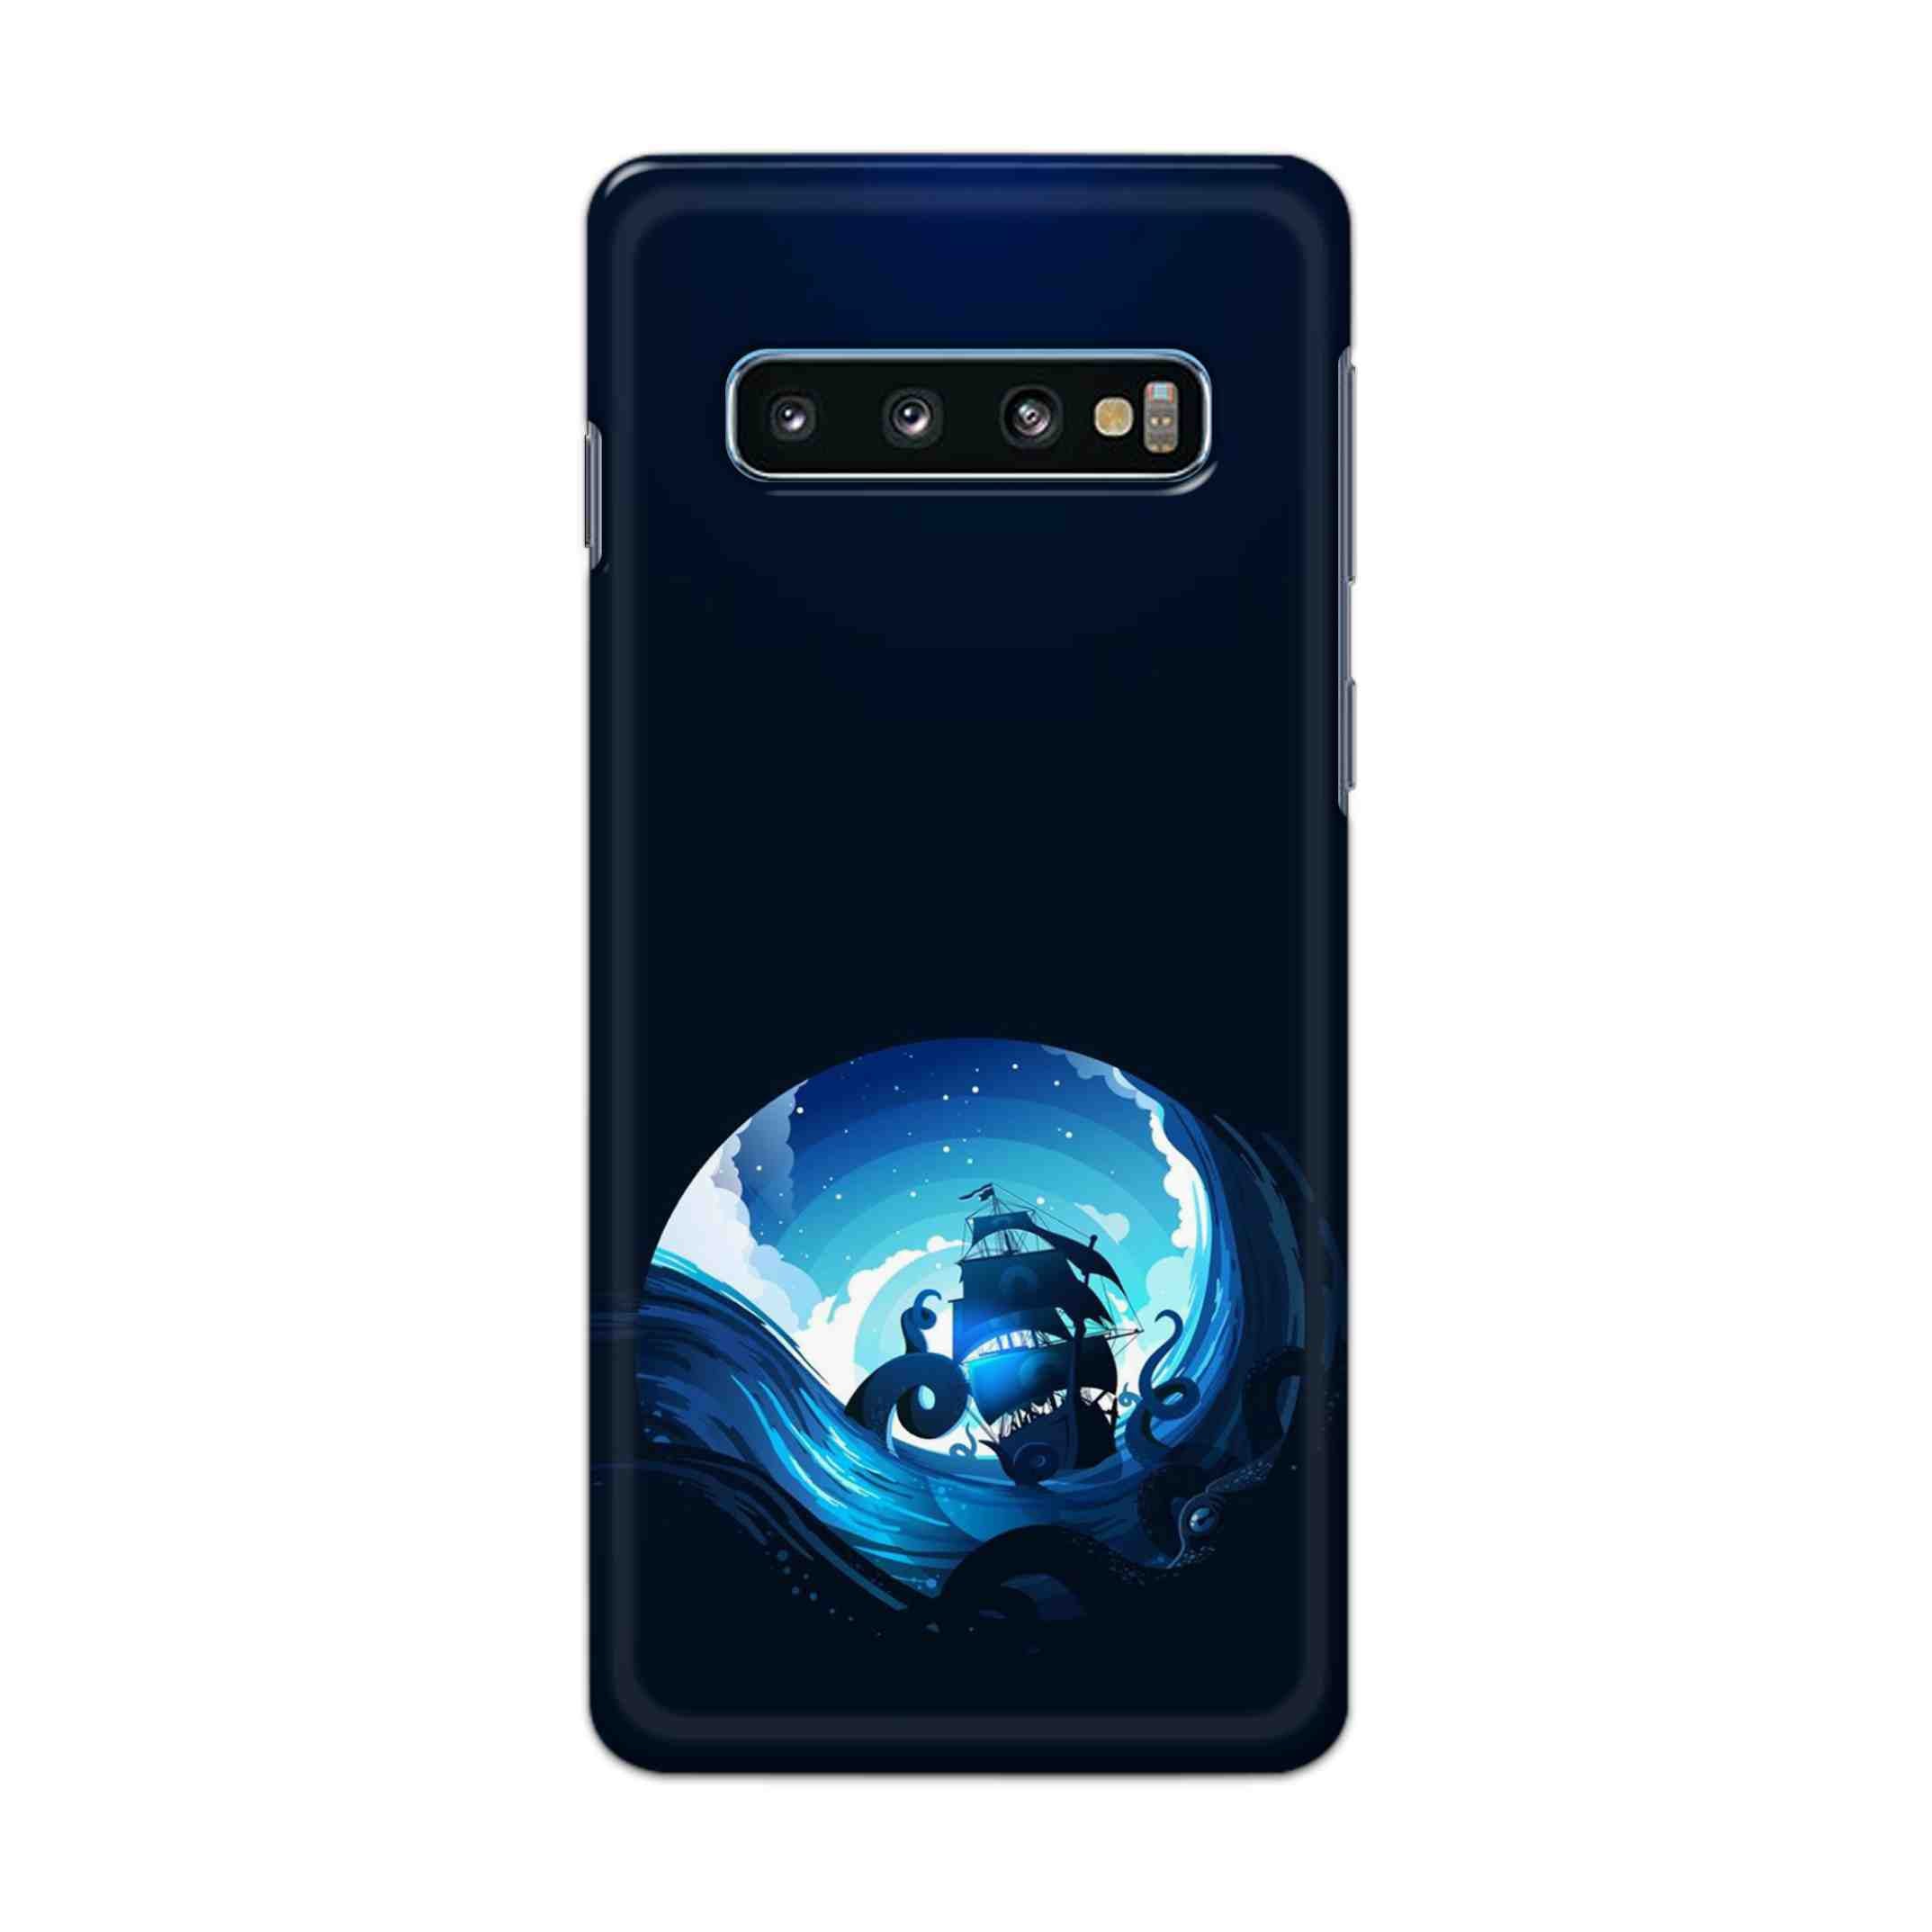 Buy Blue Sea Ship Hard Back Mobile Phone Case Cover For Samsung Galaxy S10 Plus Online